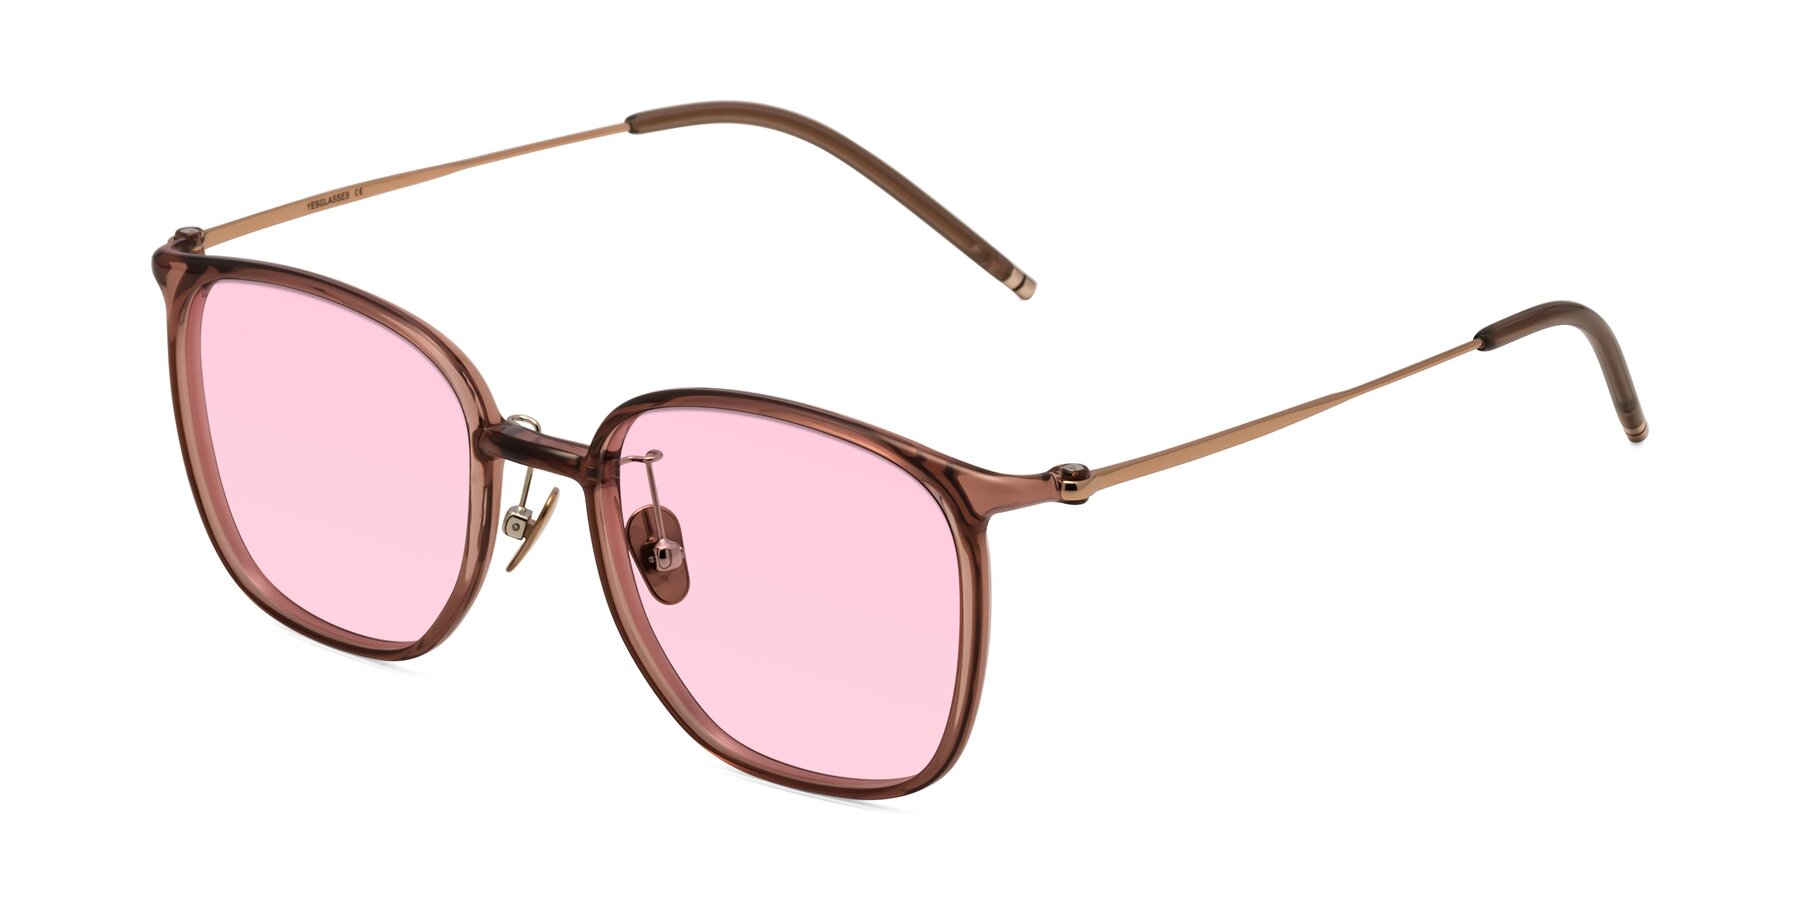 Angle of Manlius in Redwood with Light Pink Tinted Lenses